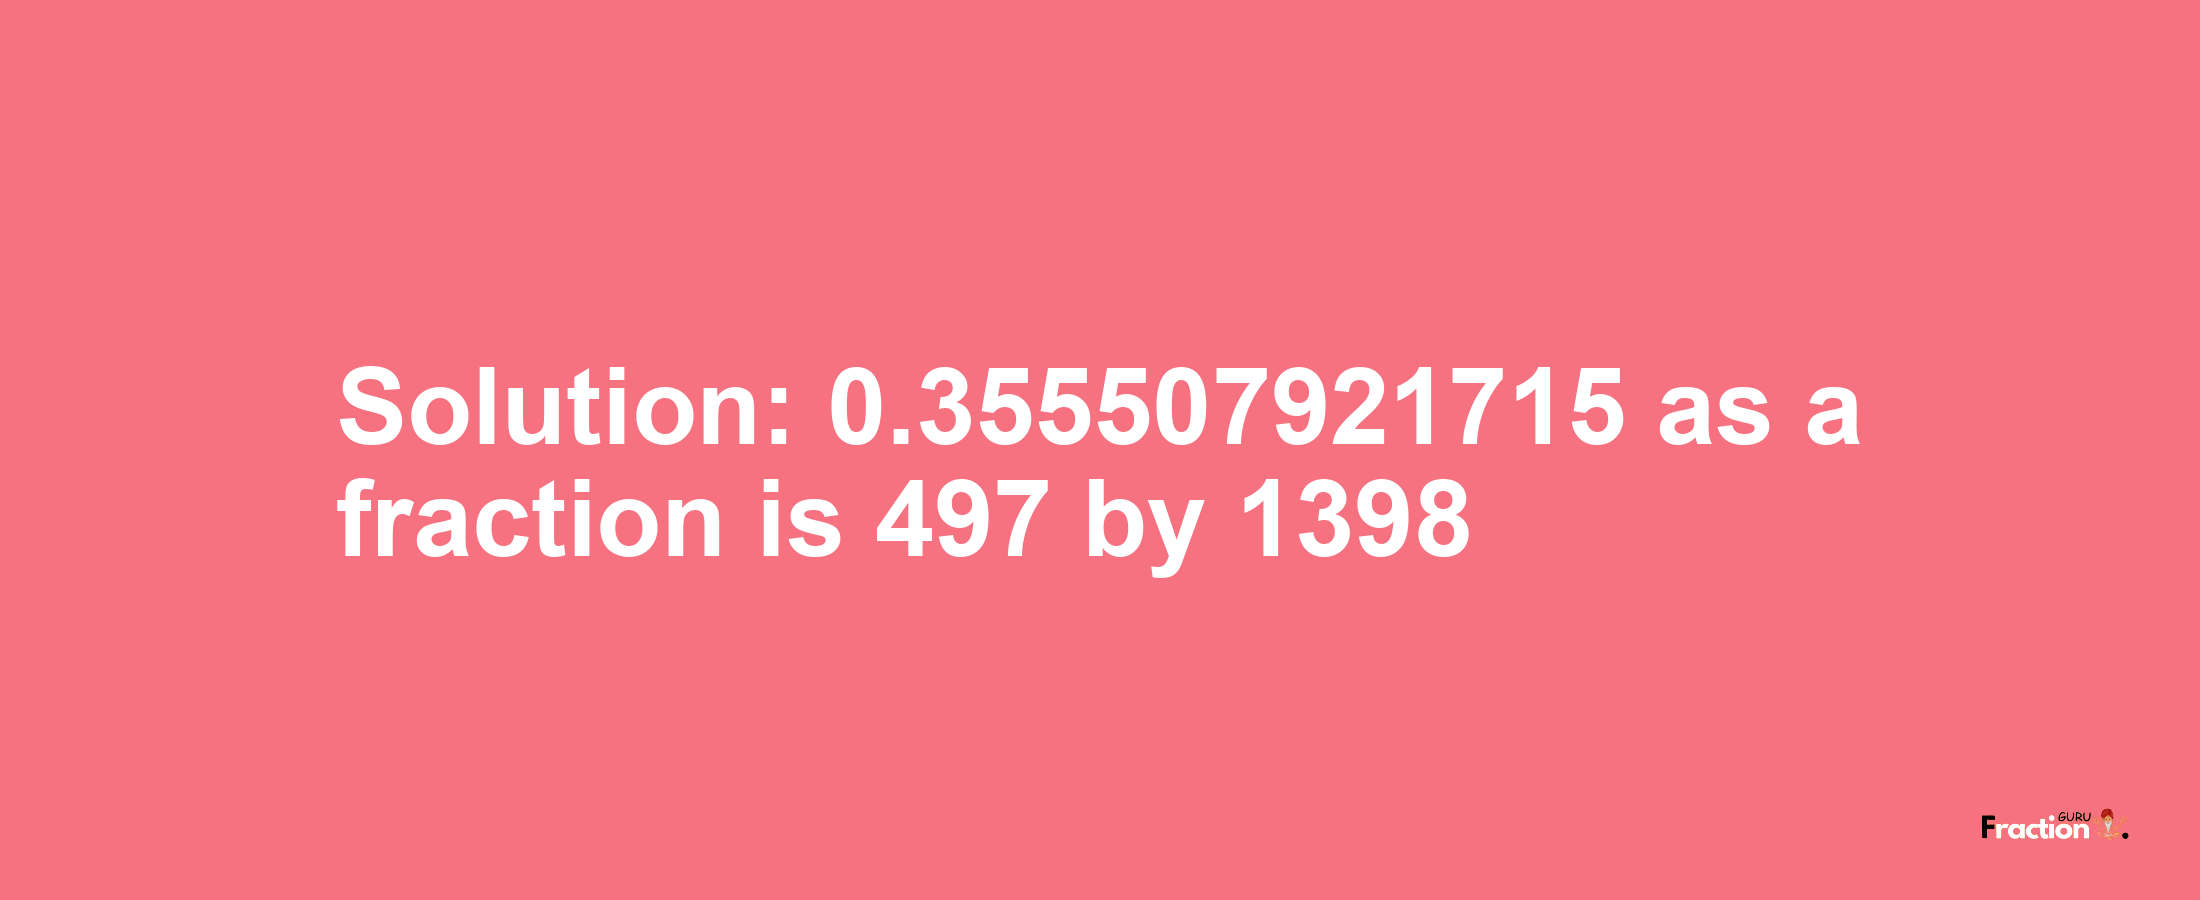 Solution:0.355507921715 as a fraction is 497/1398